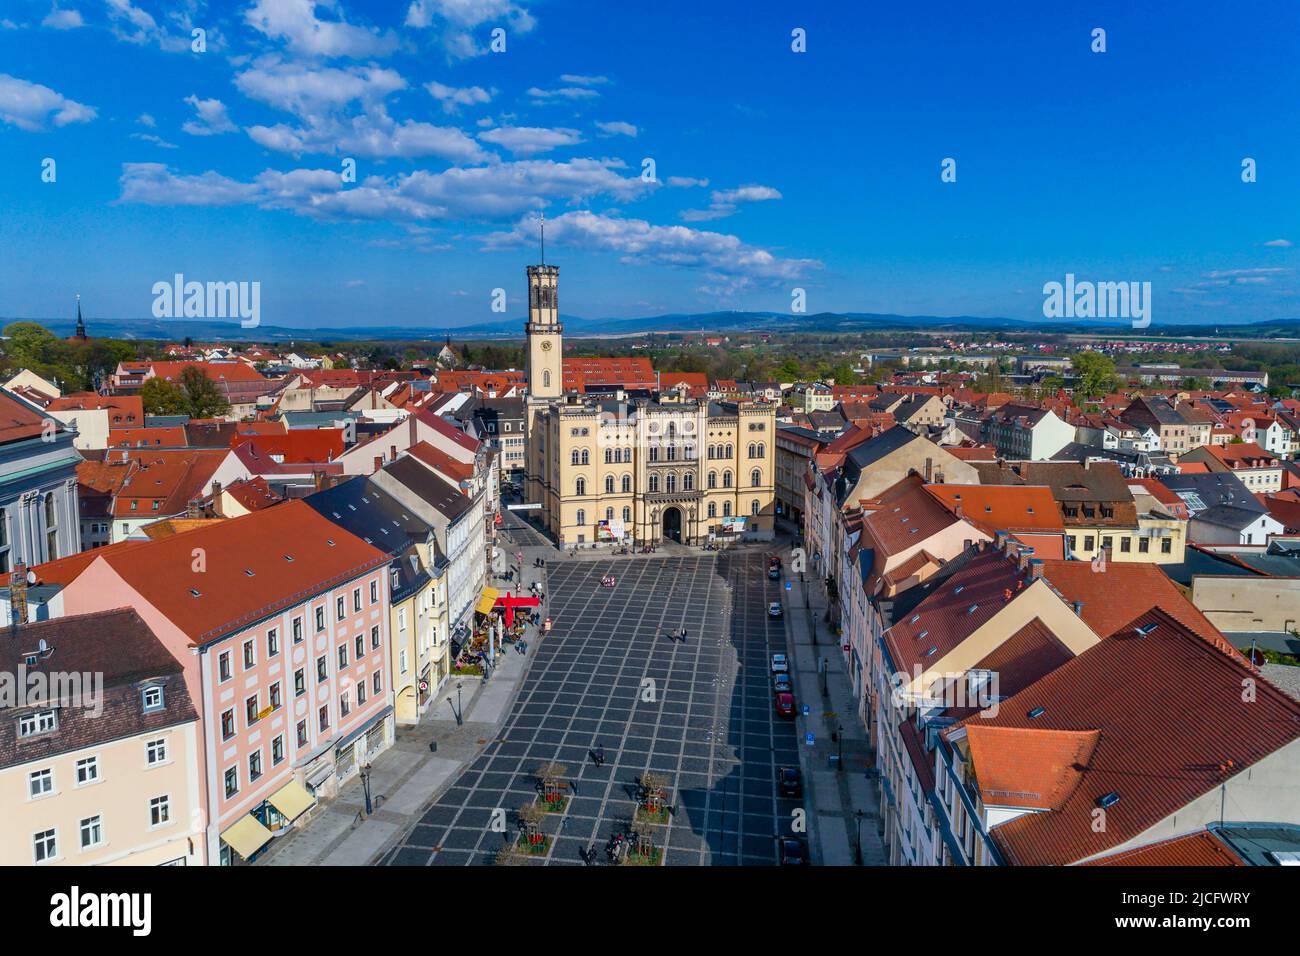 The city of Zittau is the most southeastern city in Saxony. Stock Photo